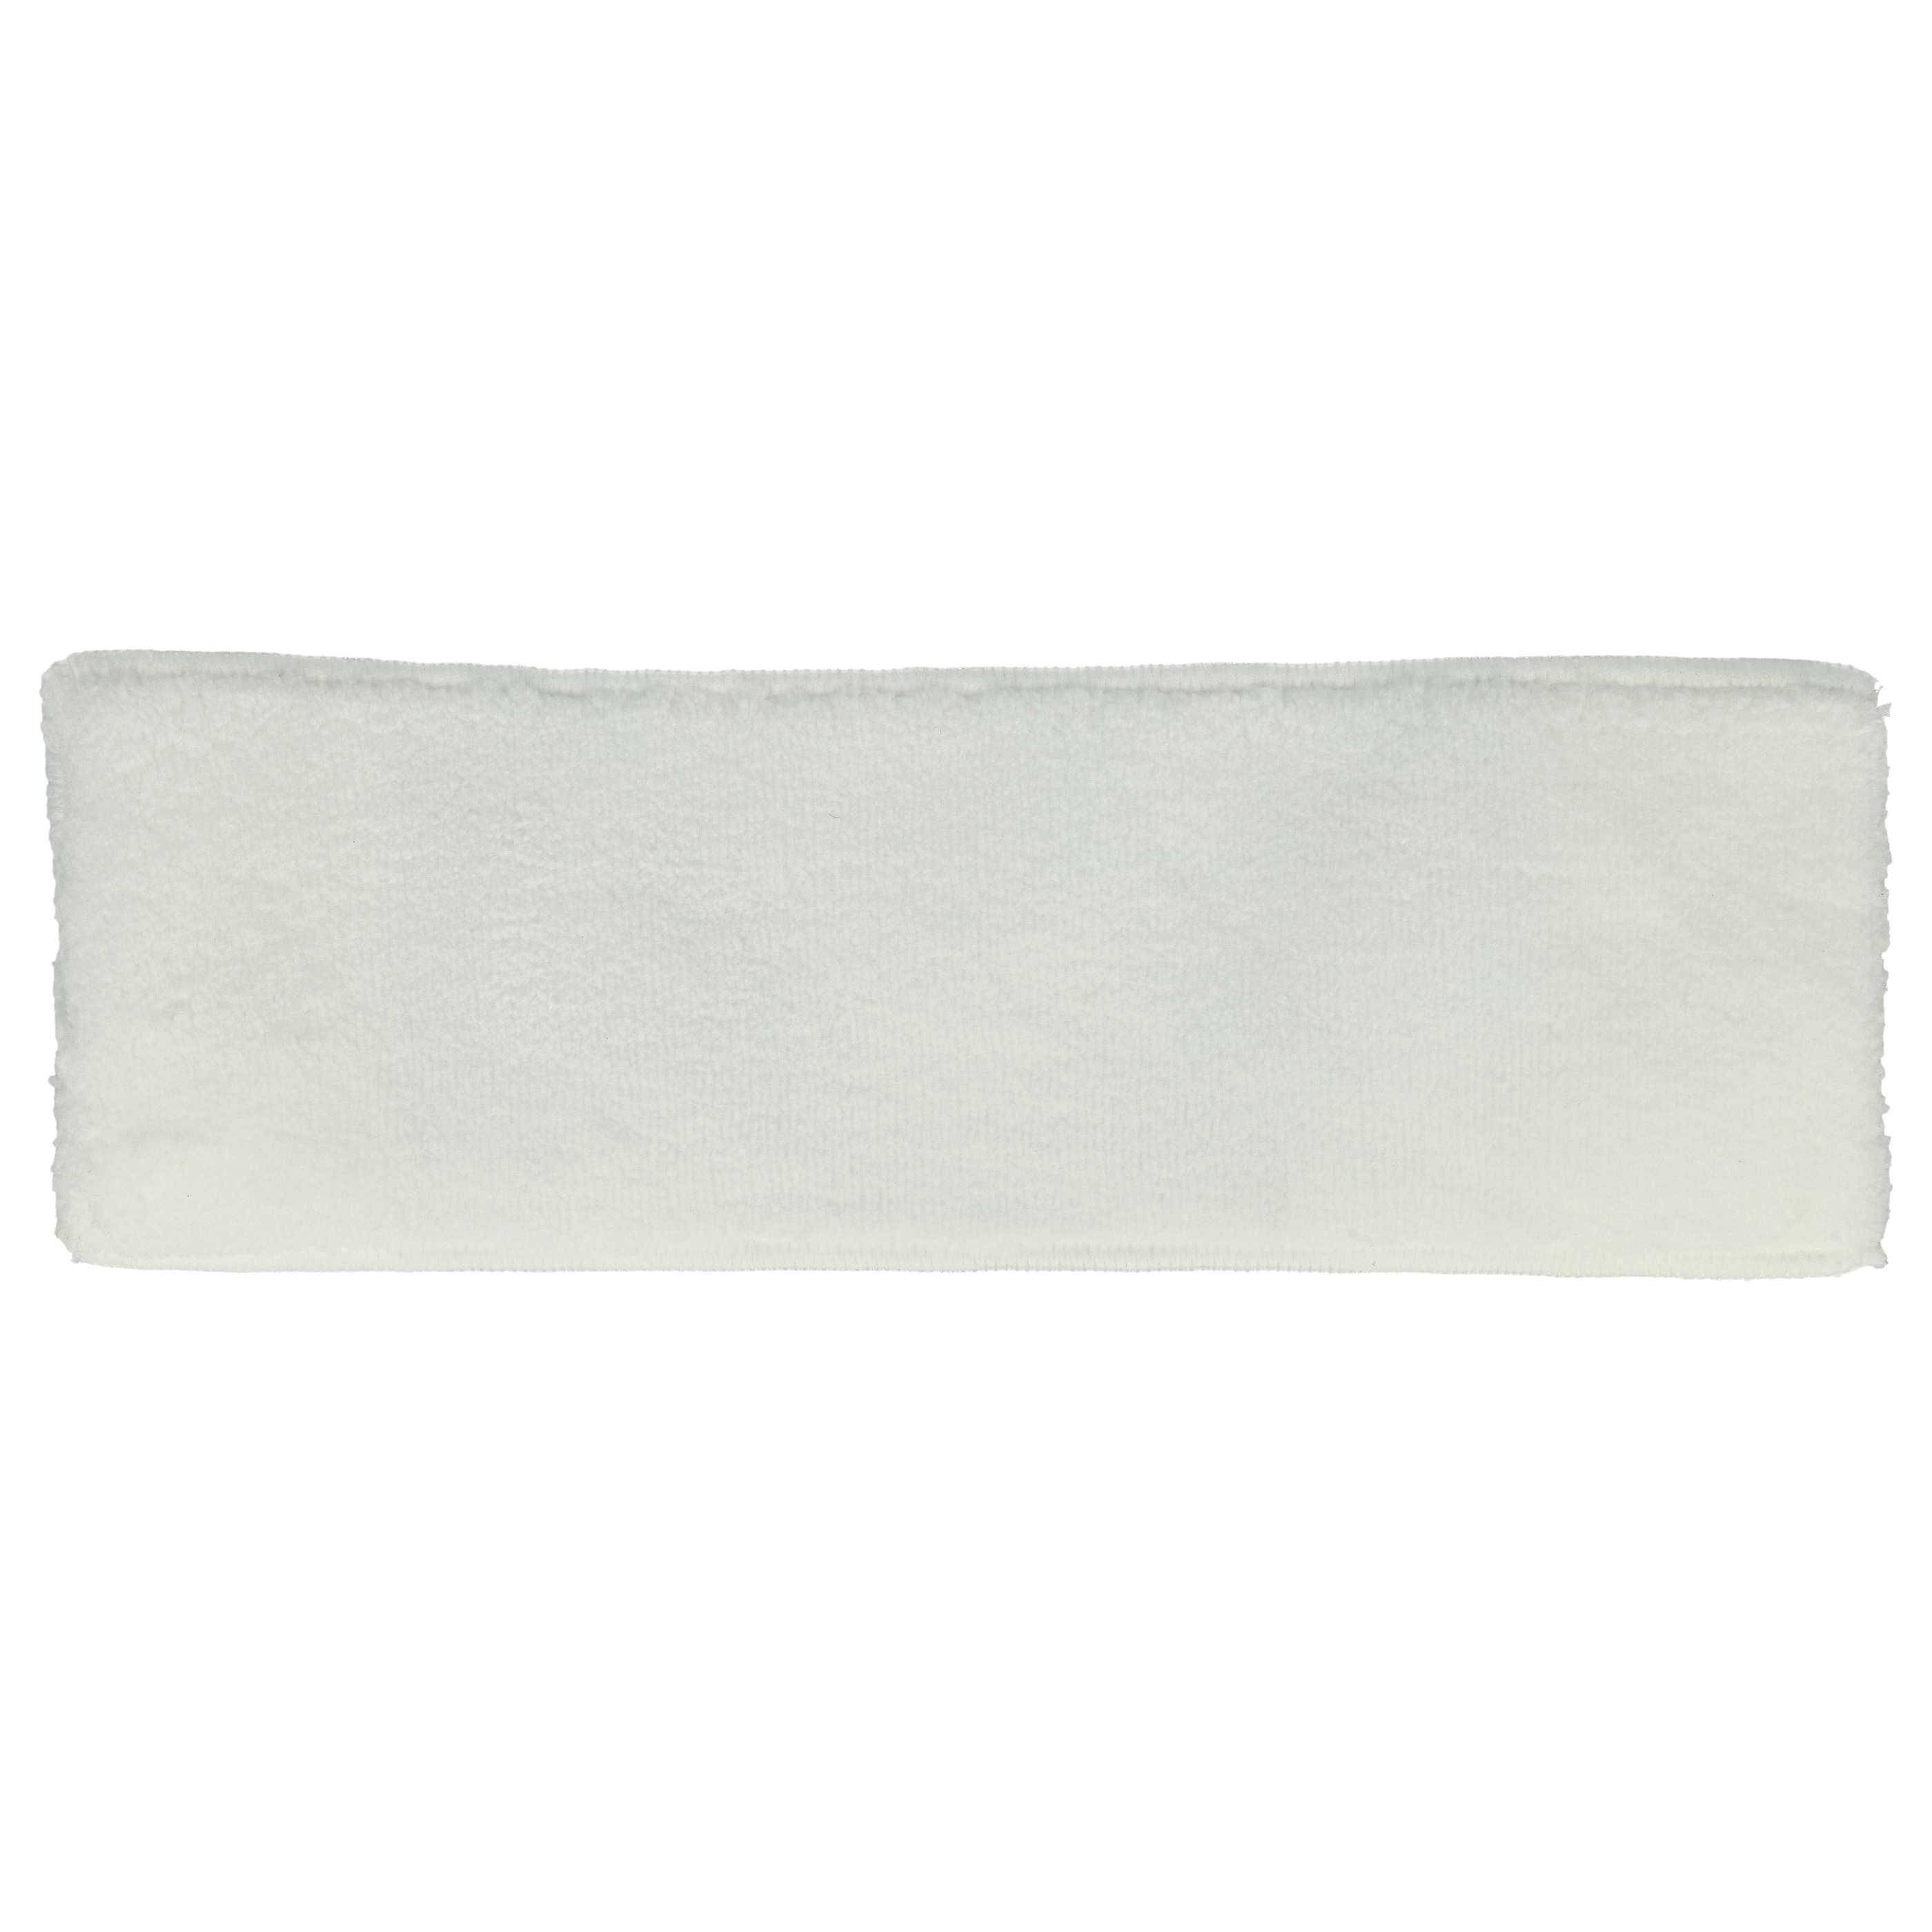 Cleaning Cloth replaces Kärcher 2.863-020.0 for Steam Mop - microfibre